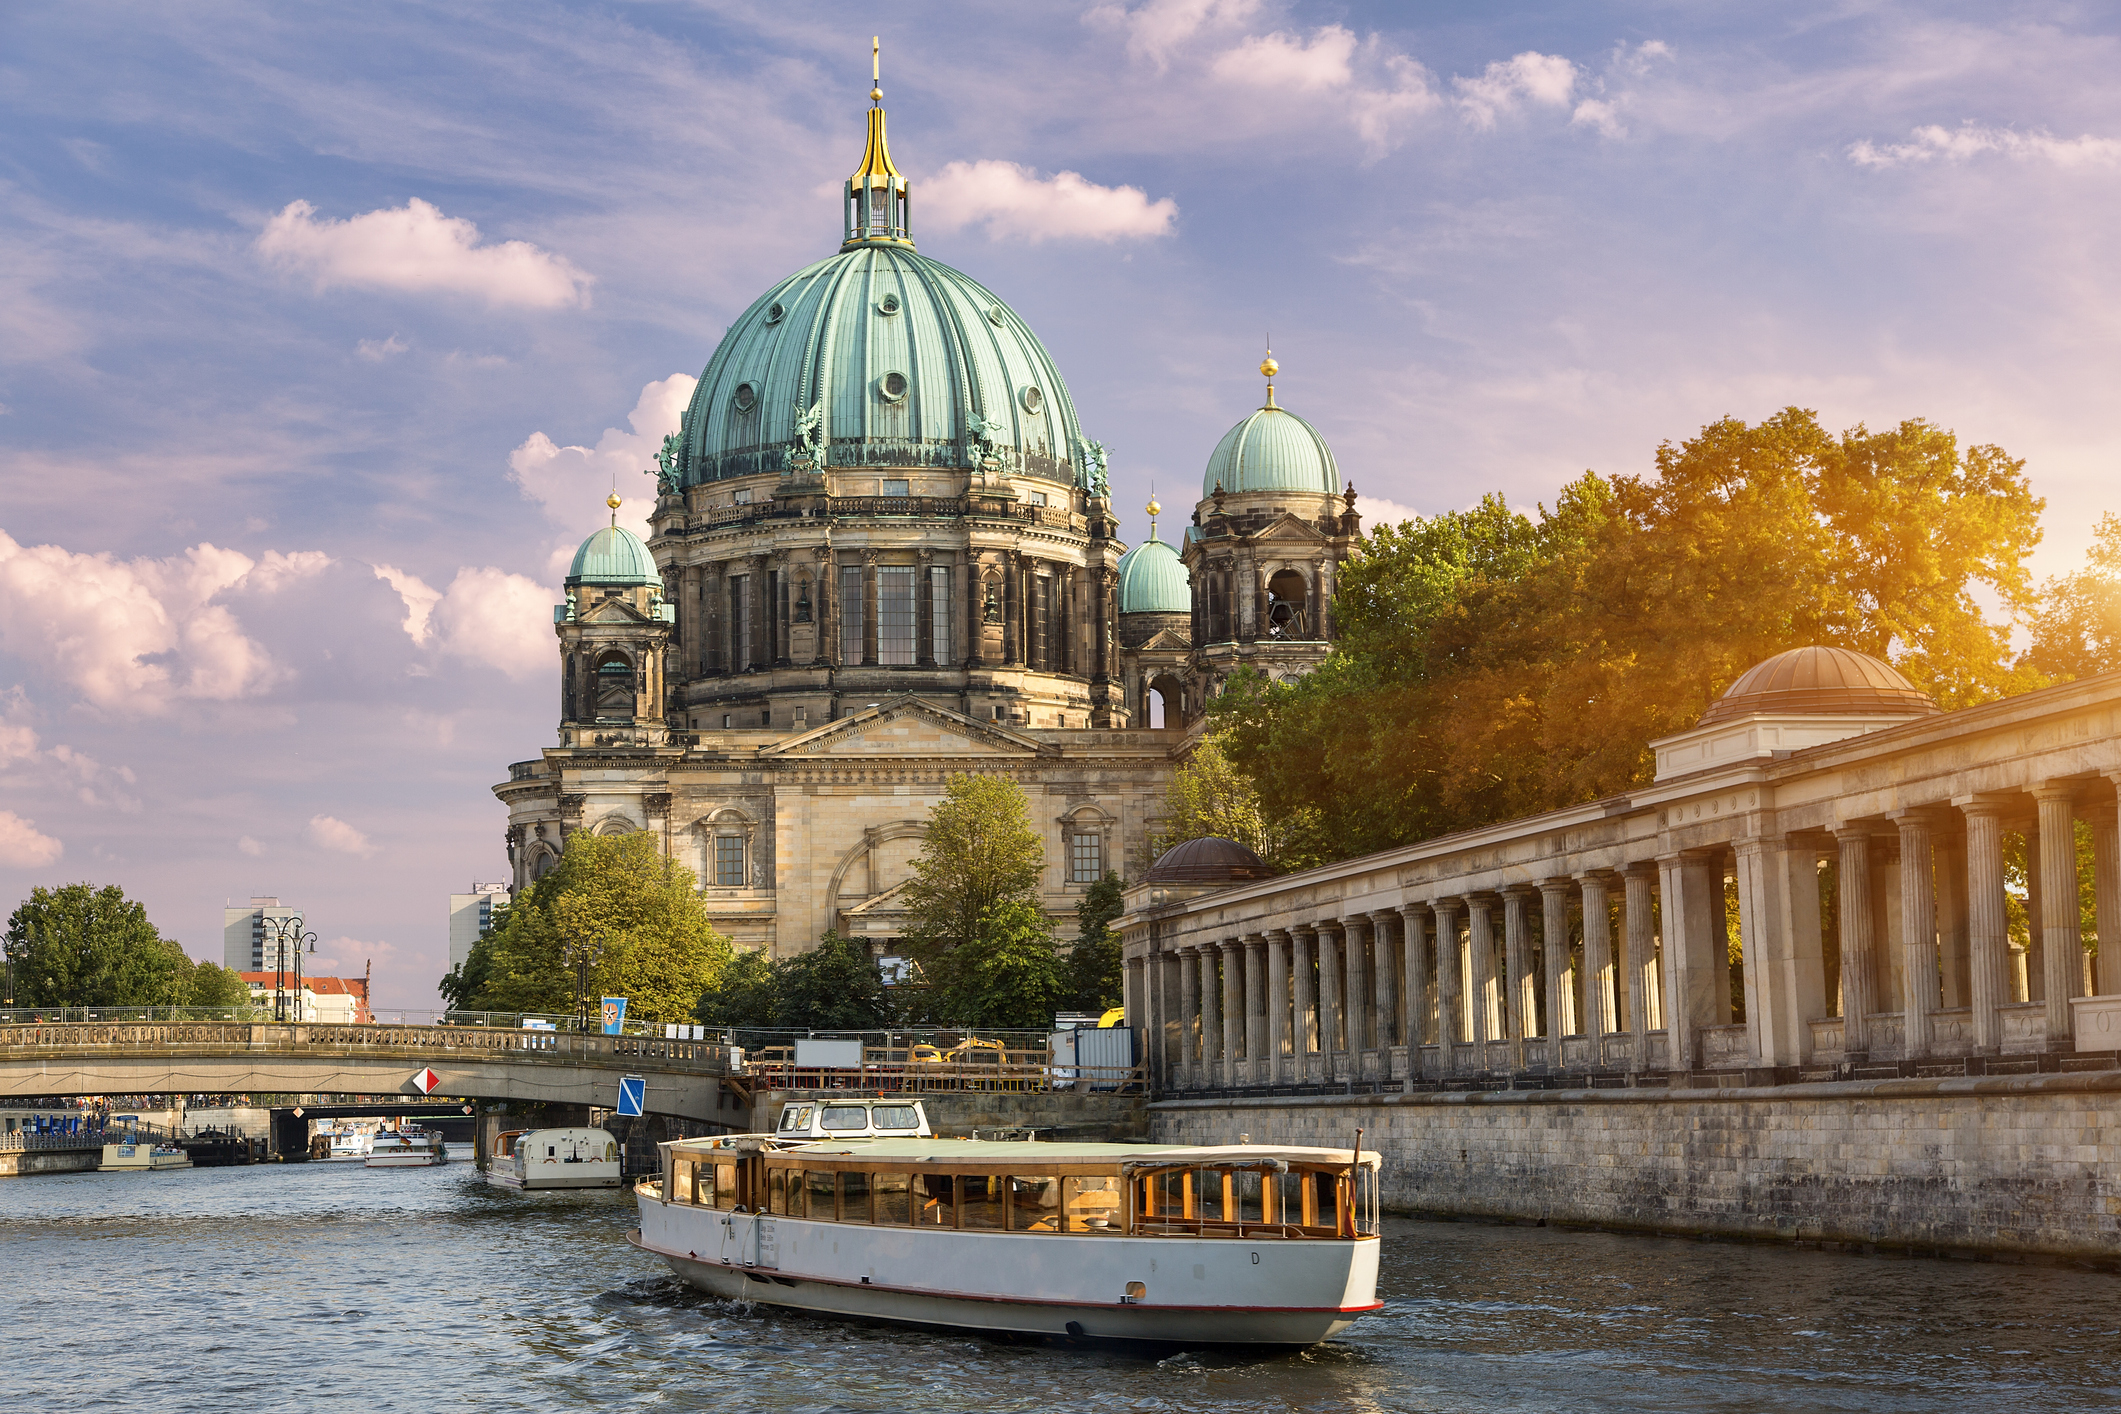 Berlin Cathedral by the Spree river with a passing tour boat in the foreground